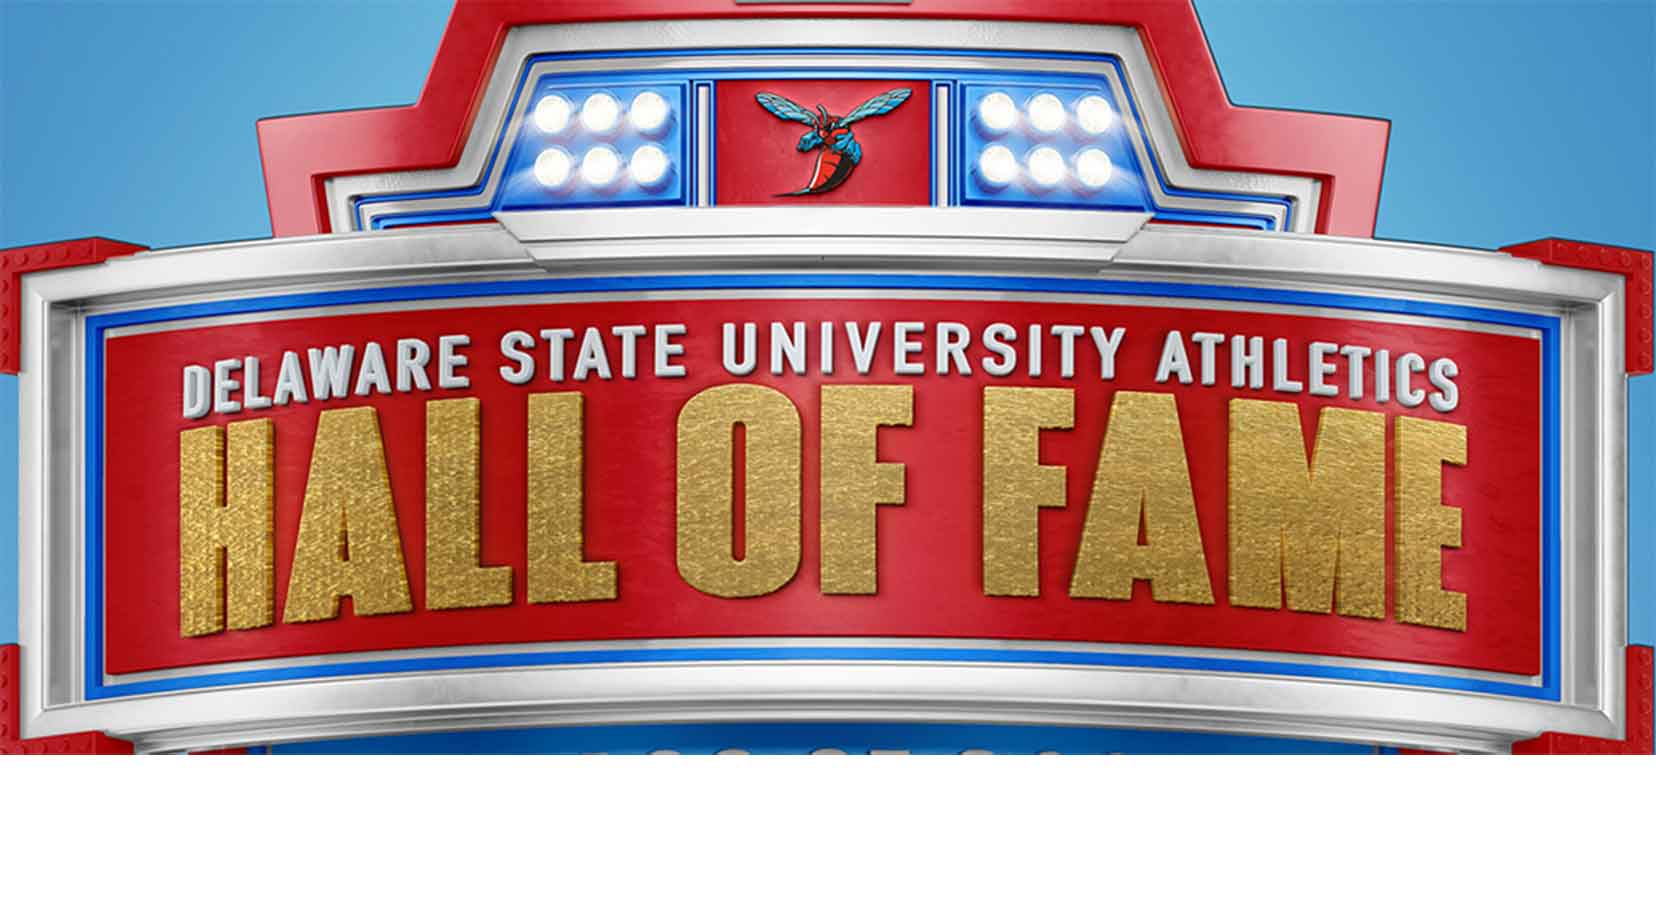 Delaware State University Athletic Hall of Fame